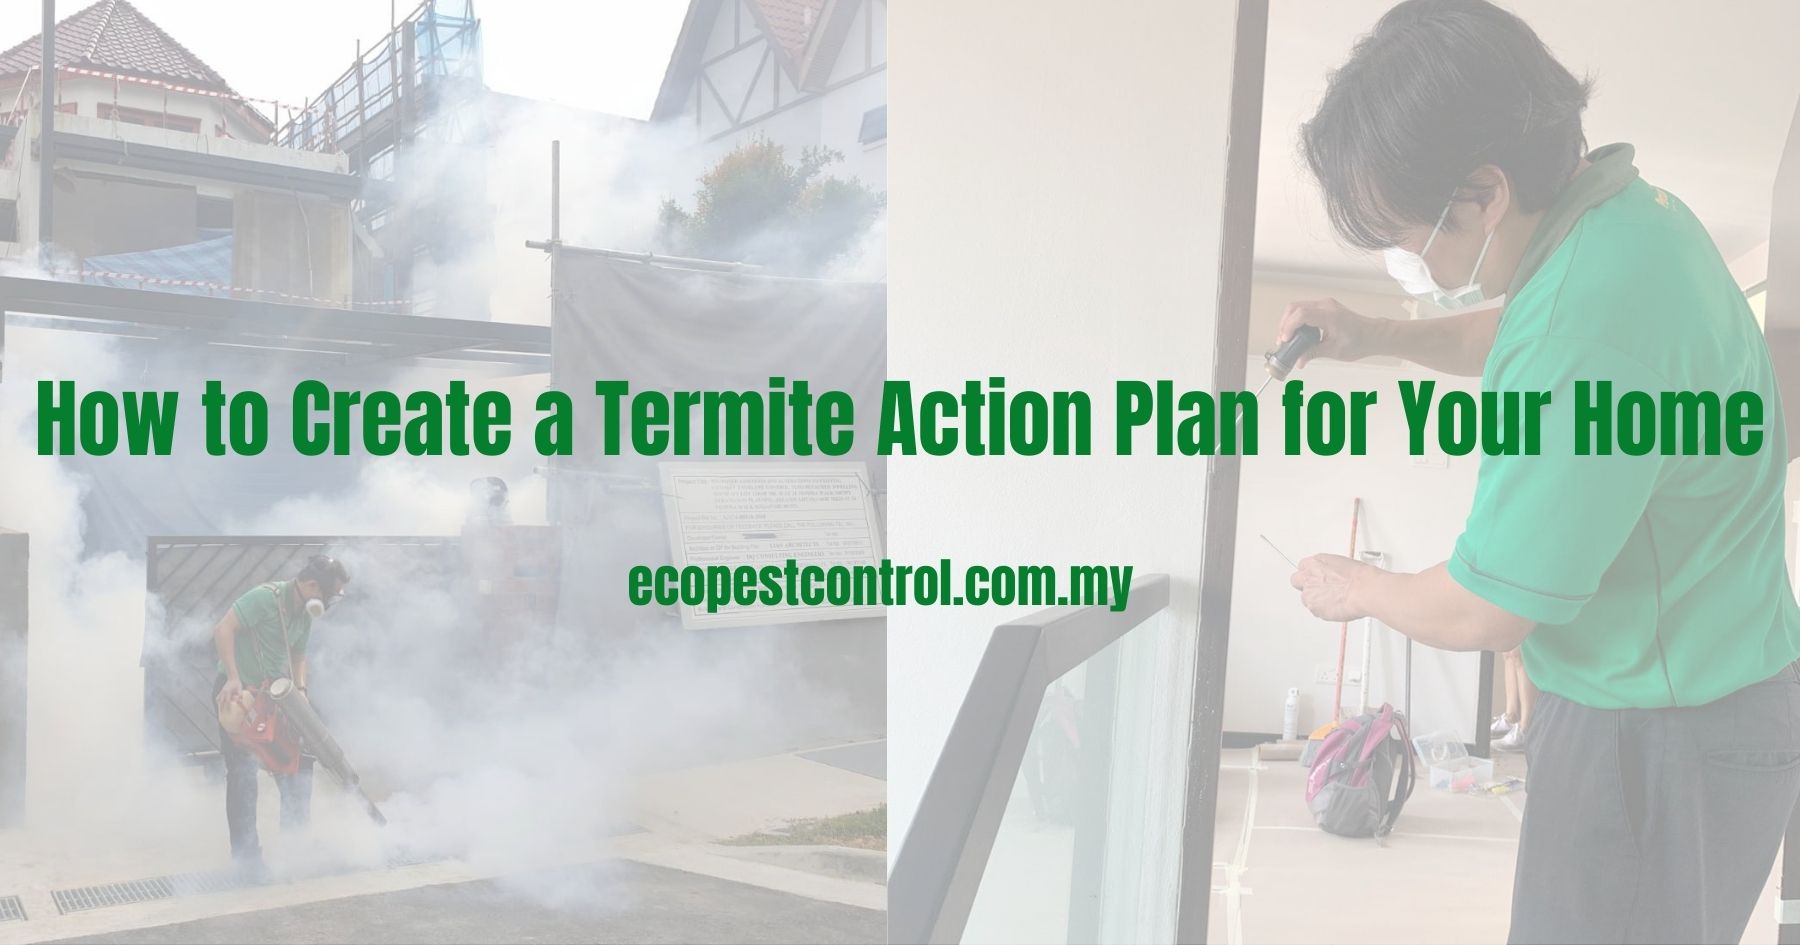 How to Create a Termite Action Plan for Your Home